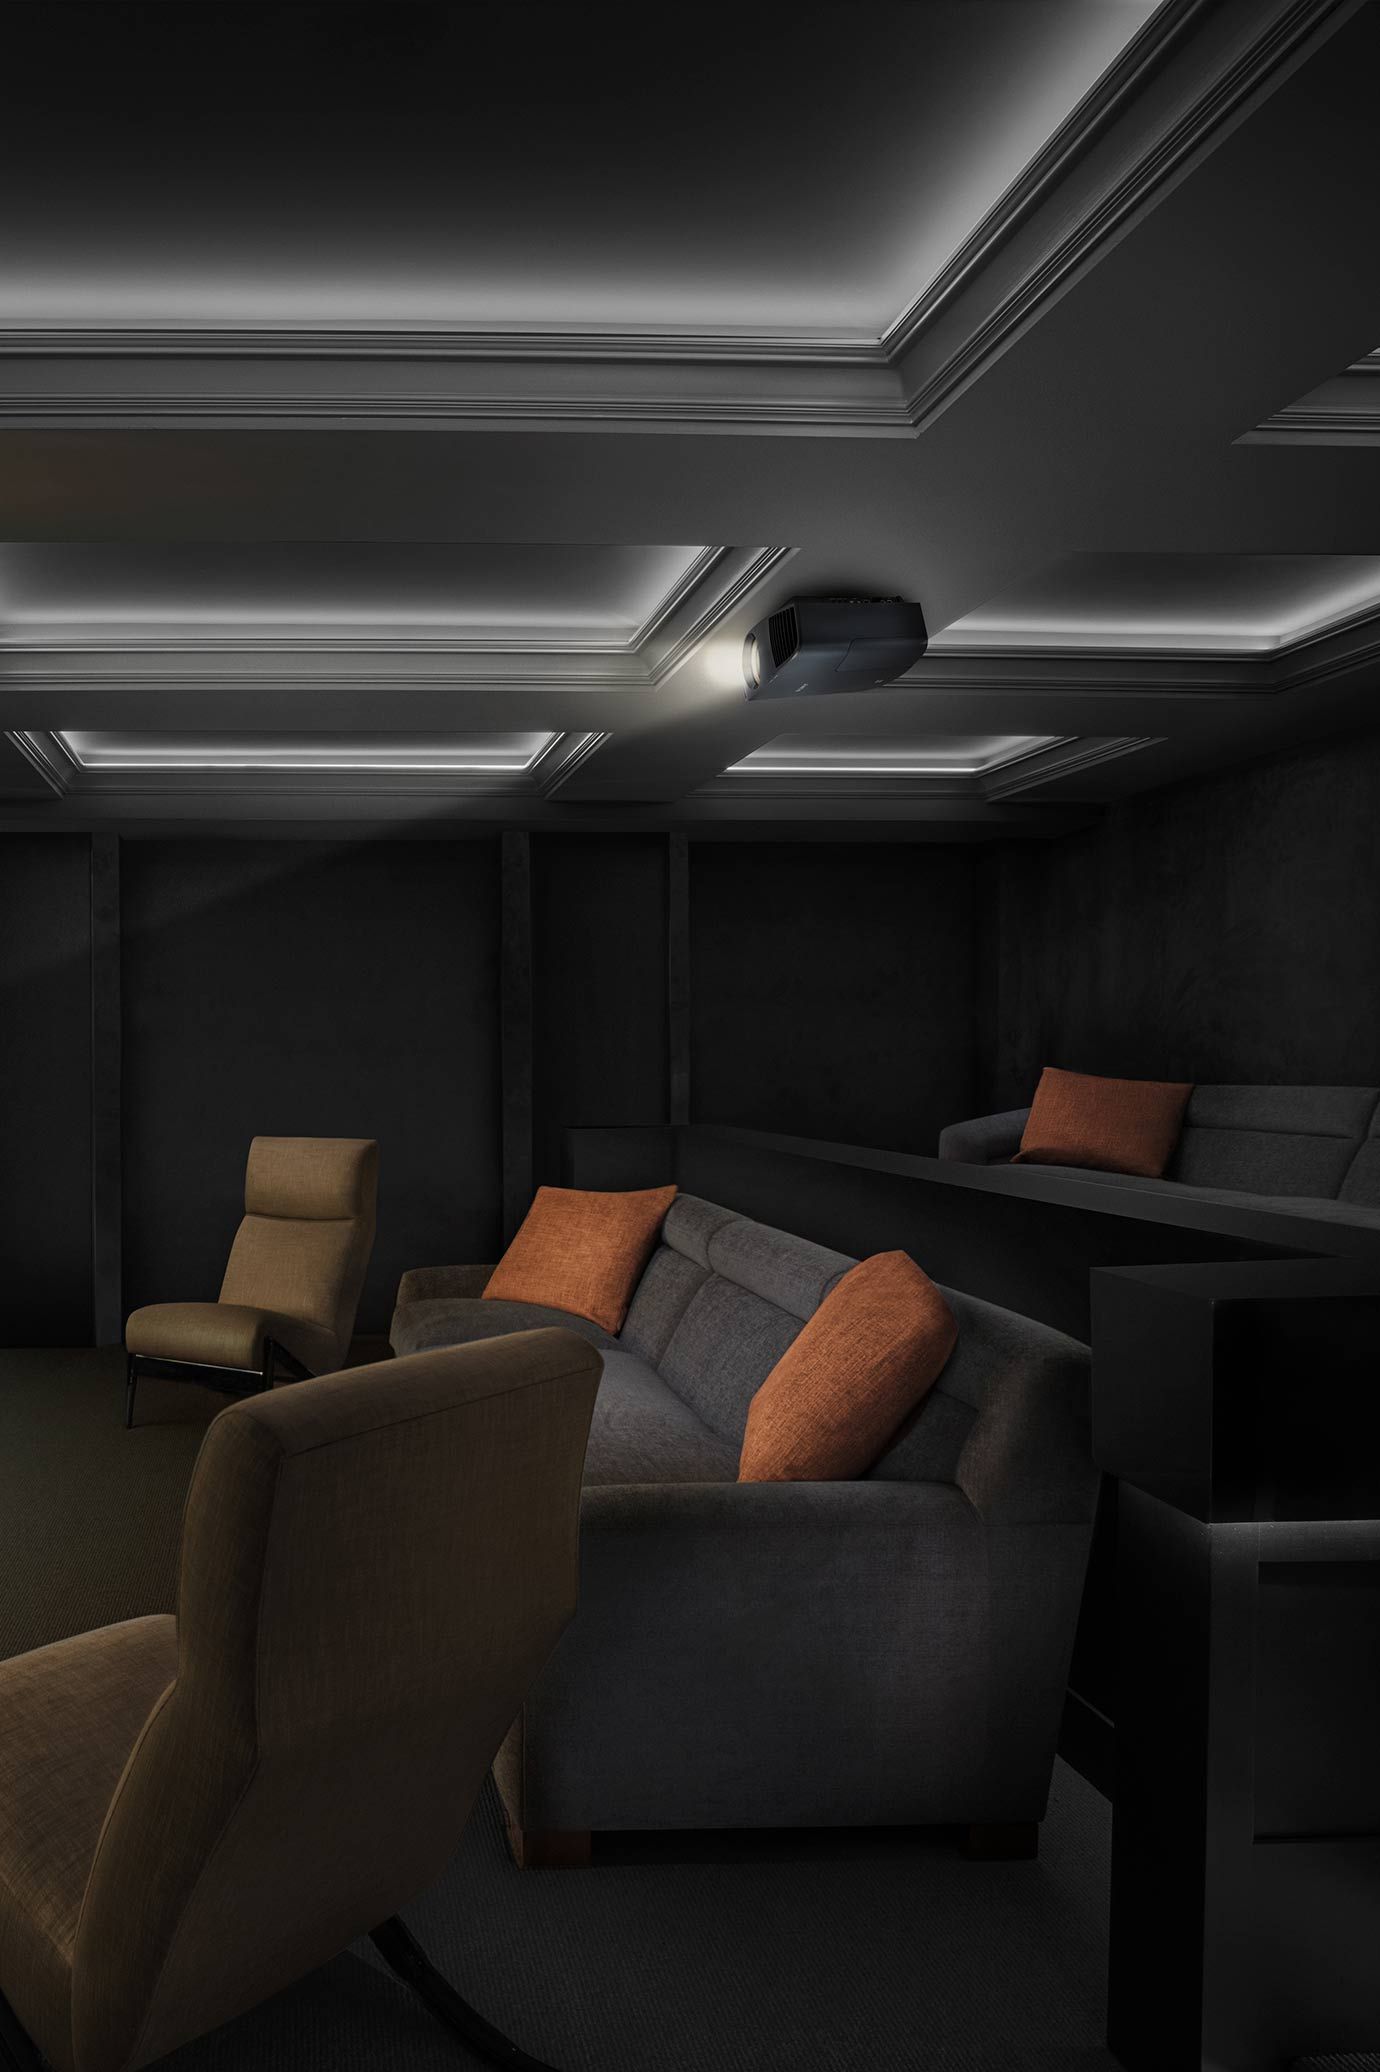 LED Lighting in a home theater with Sony Technology